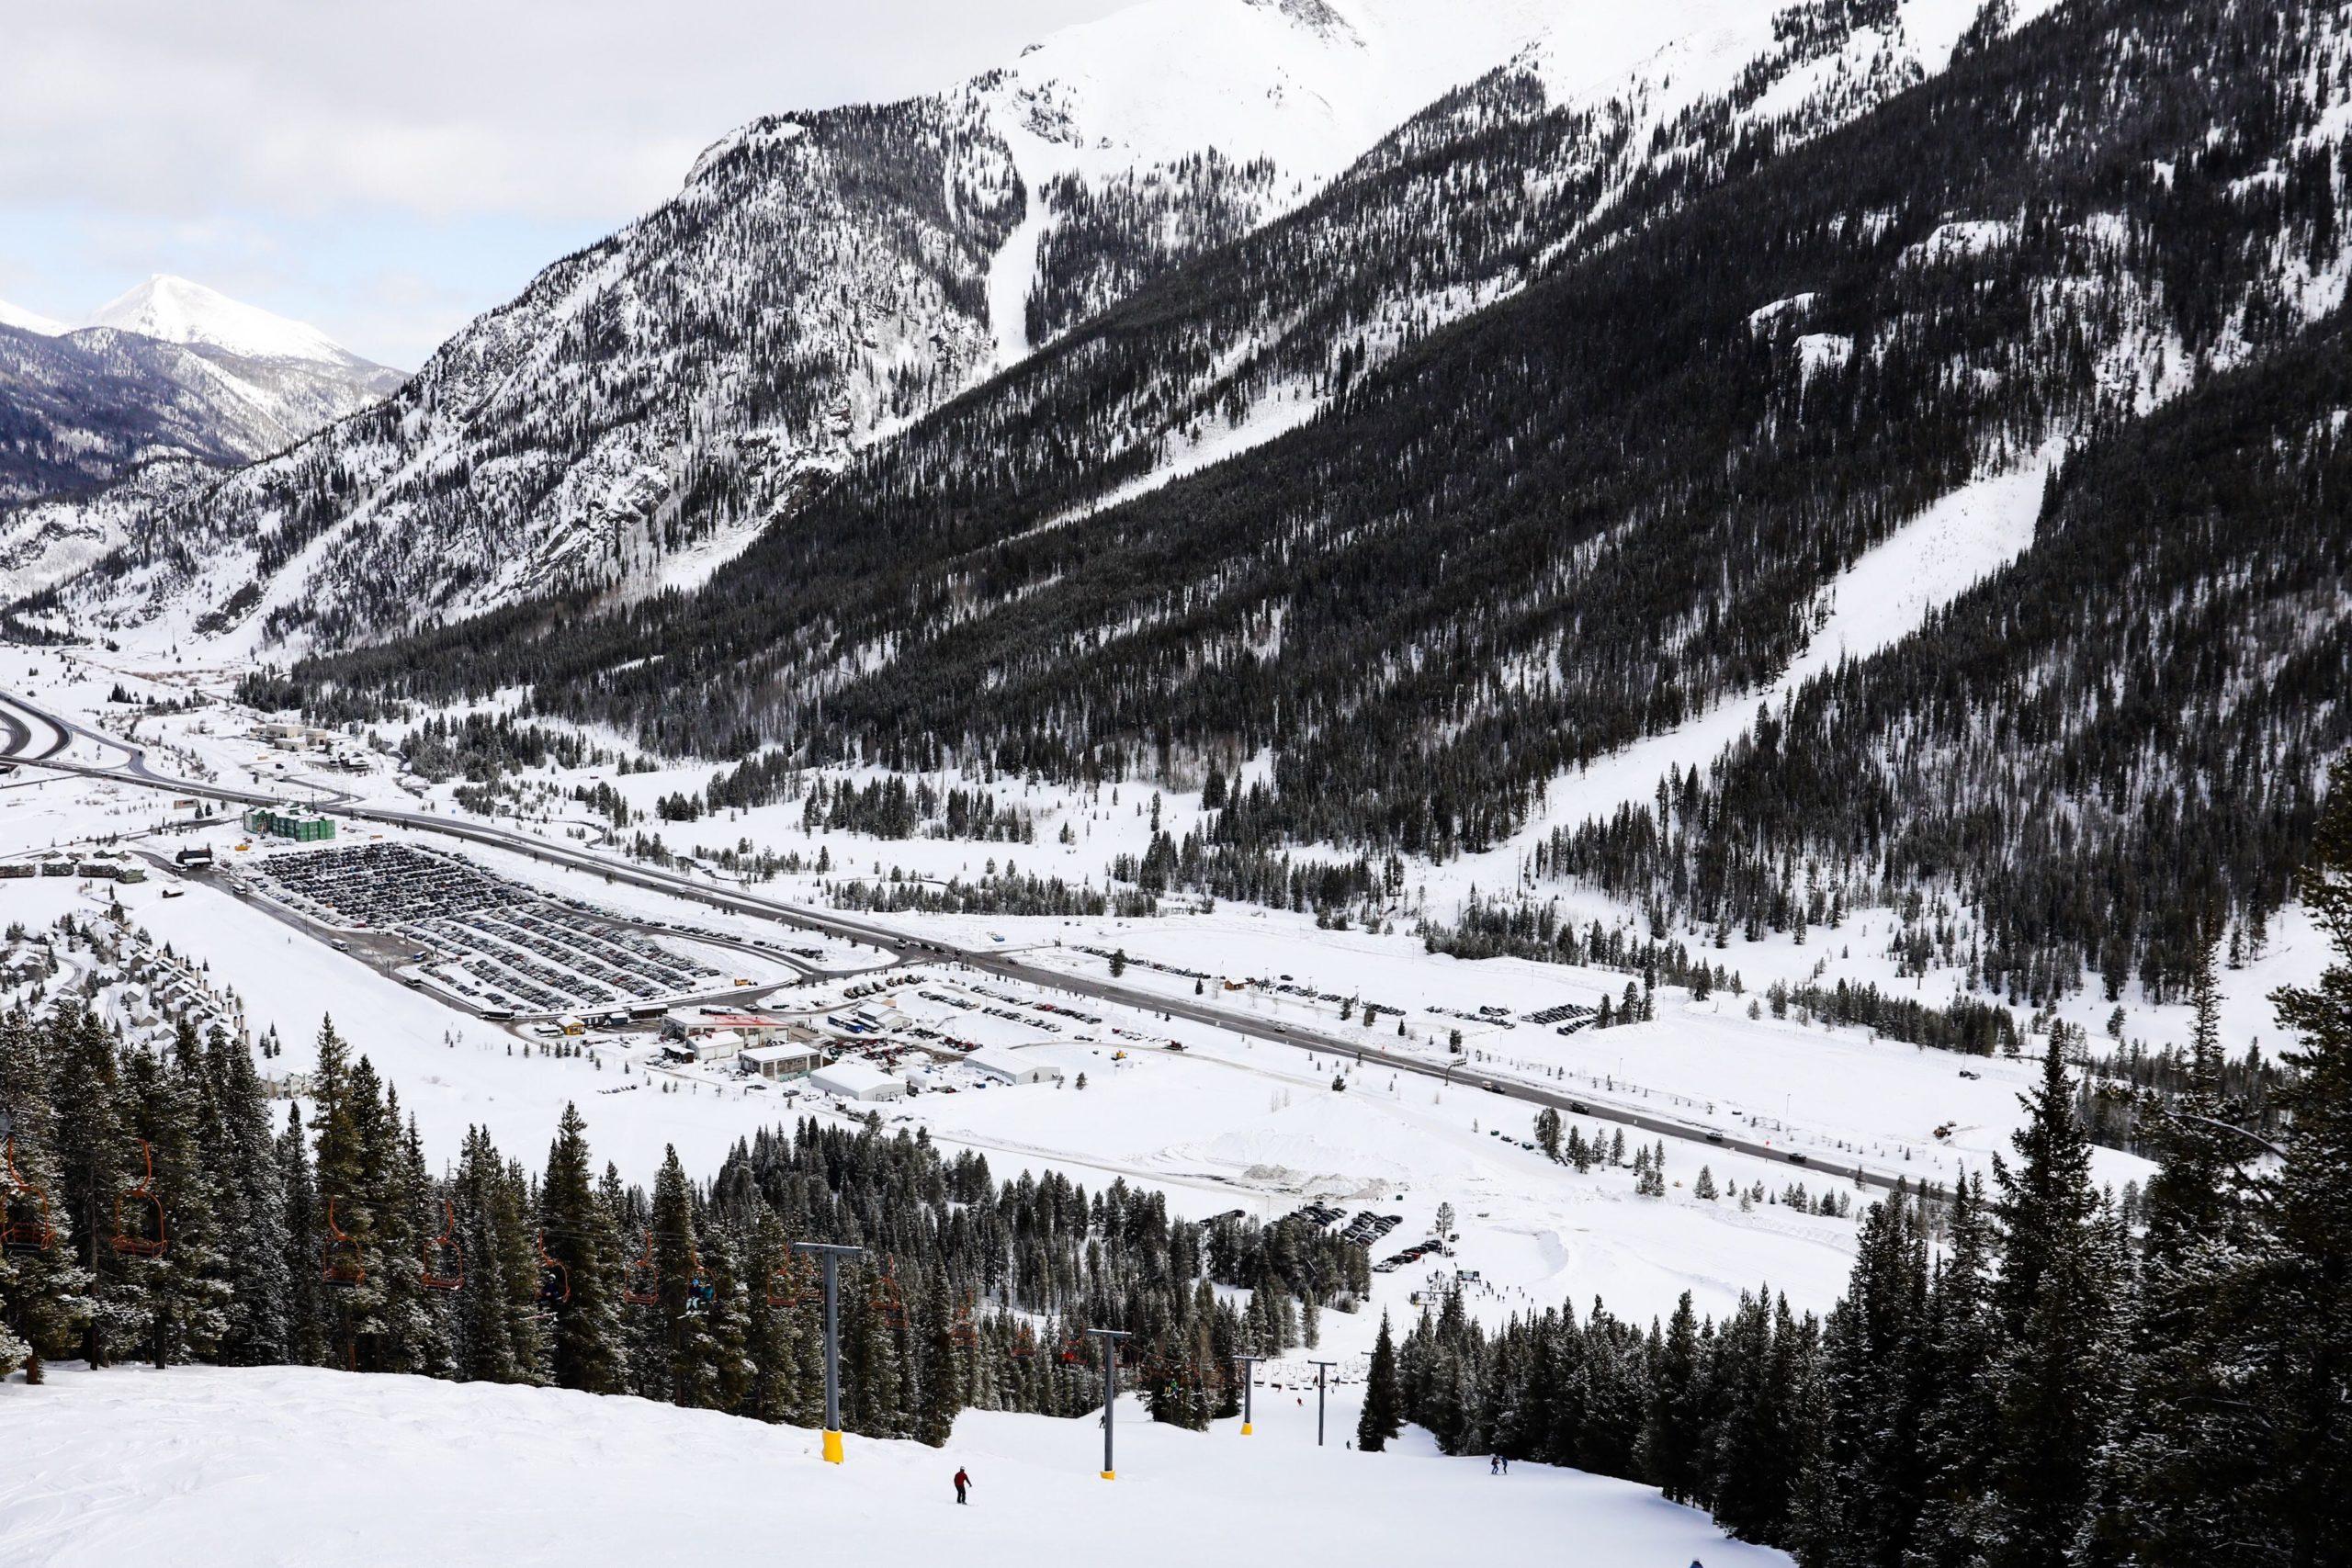 Copper Mountain parking lots partially empty